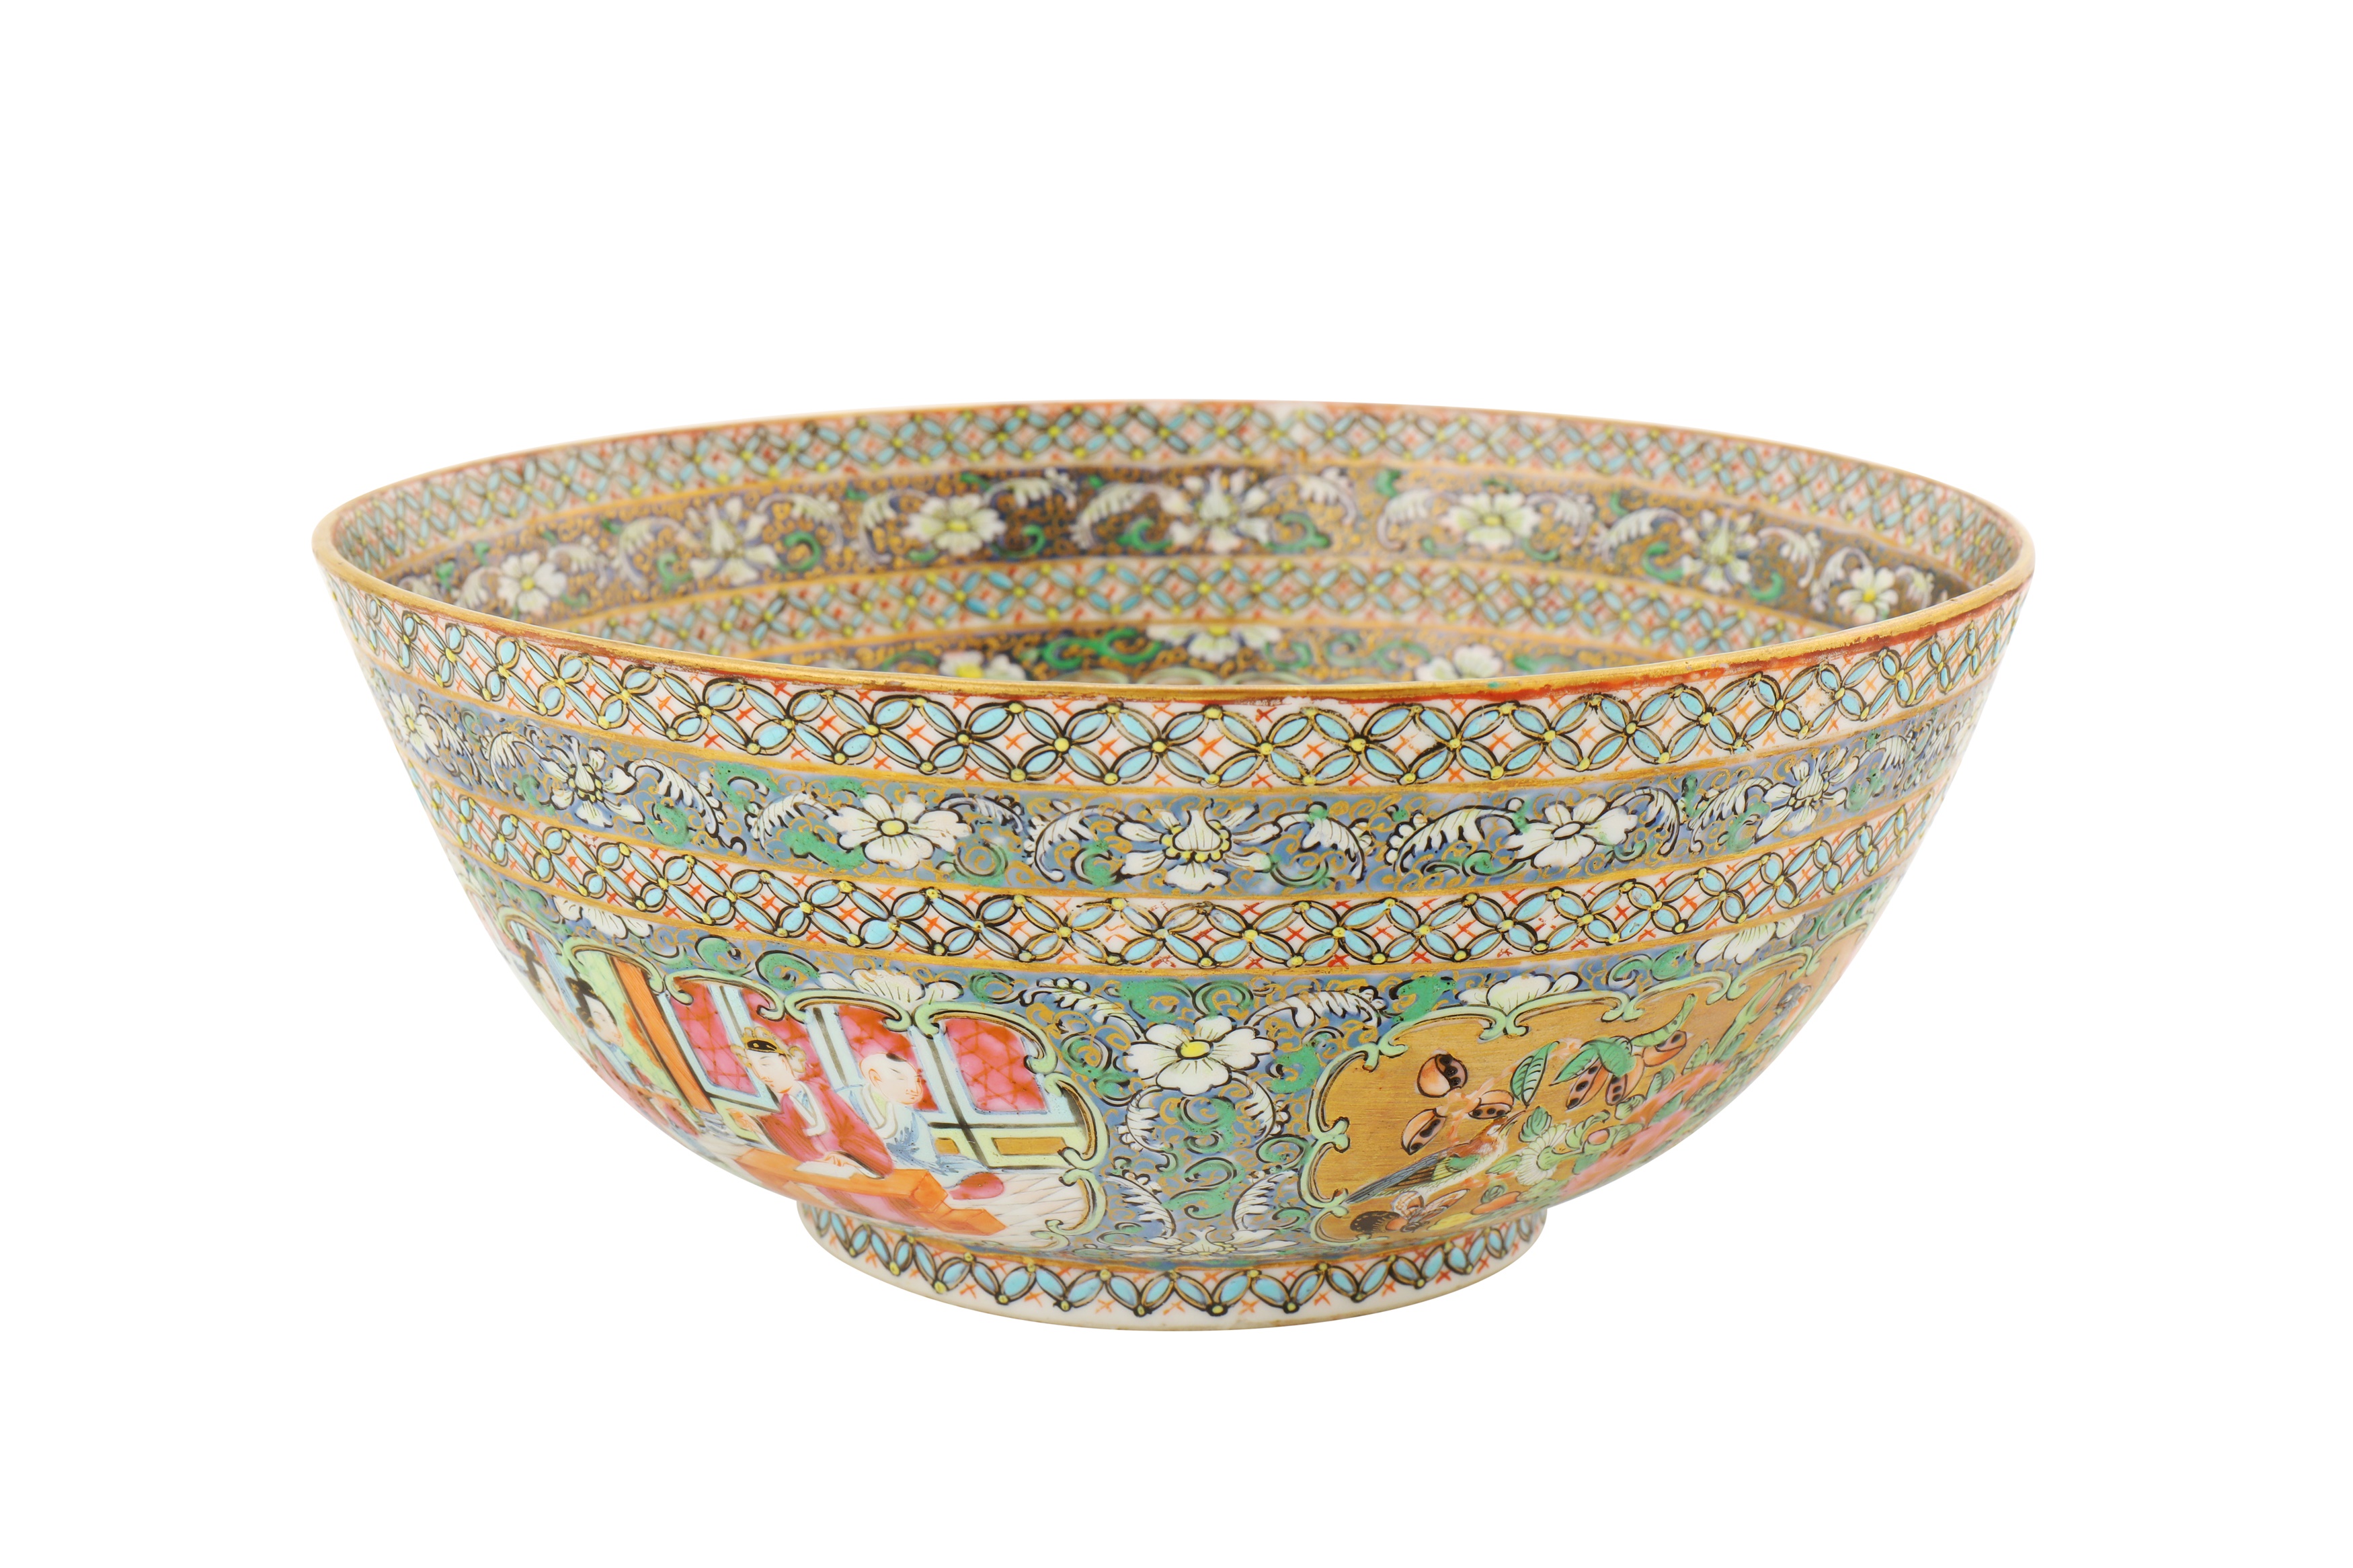 A MEDIUM SIZED BOWL AND DISH FROM THE ZILL AL-SULTAN CANTON PORCELAIN SERVICE - Image 3 of 8